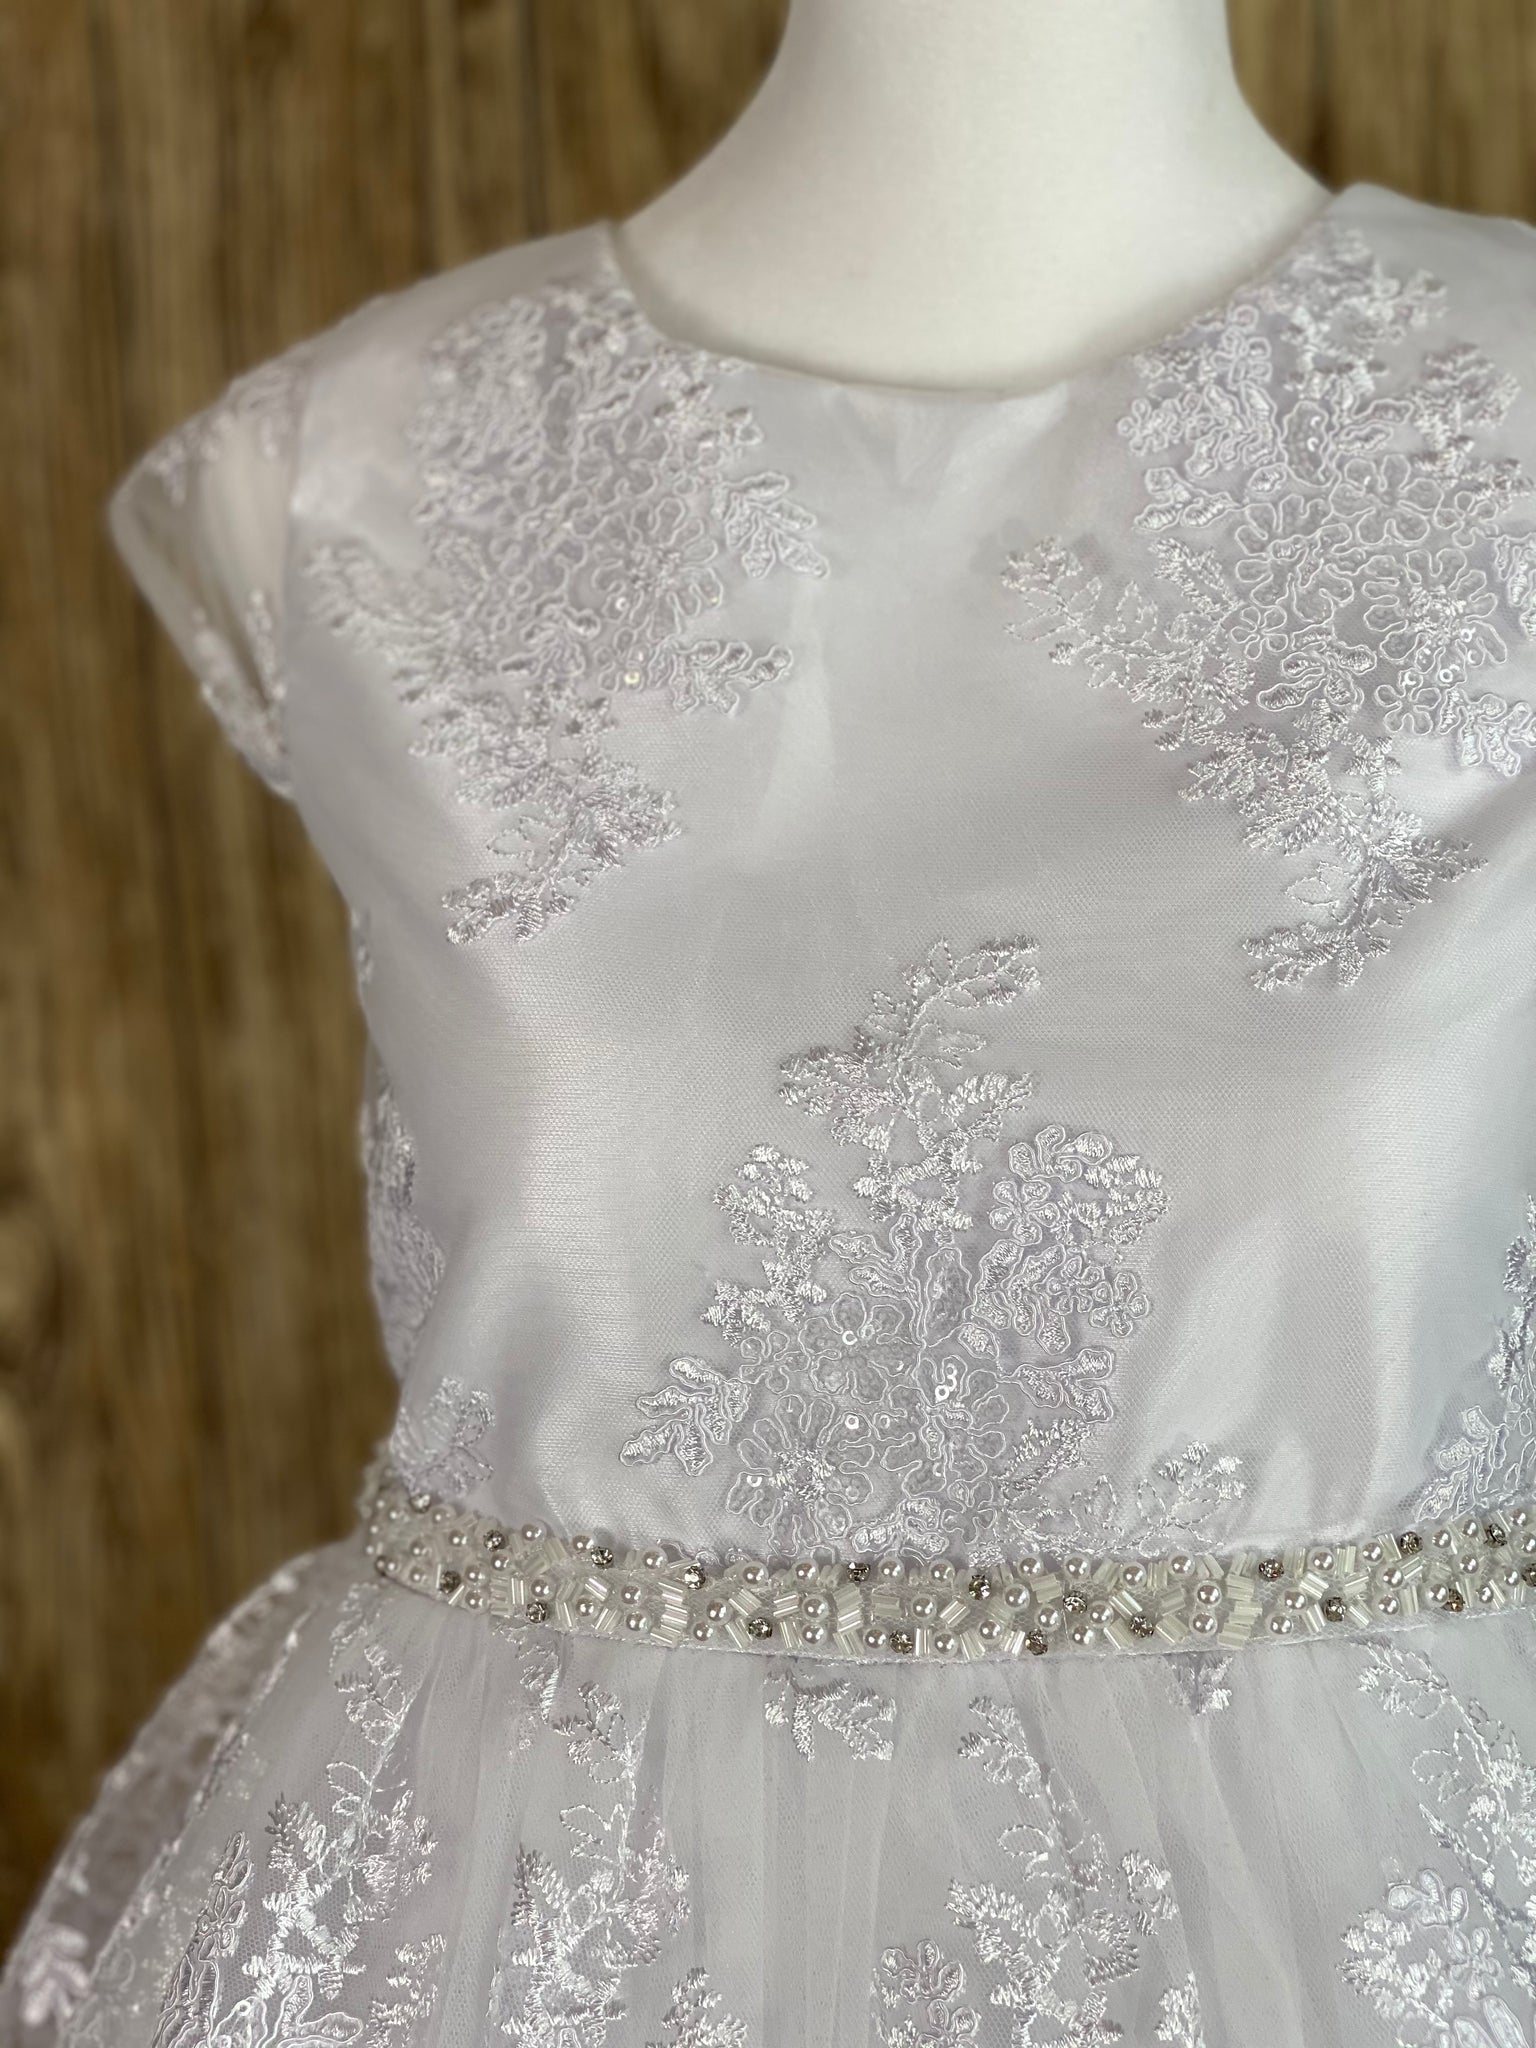 White, size 12 Cap sleeve Scoop neck with embroidered lace bodice Bead, pearl, and rhinestone thin belt Embroidered lace tulle over satin Zipper closure Tulle belt for big bow